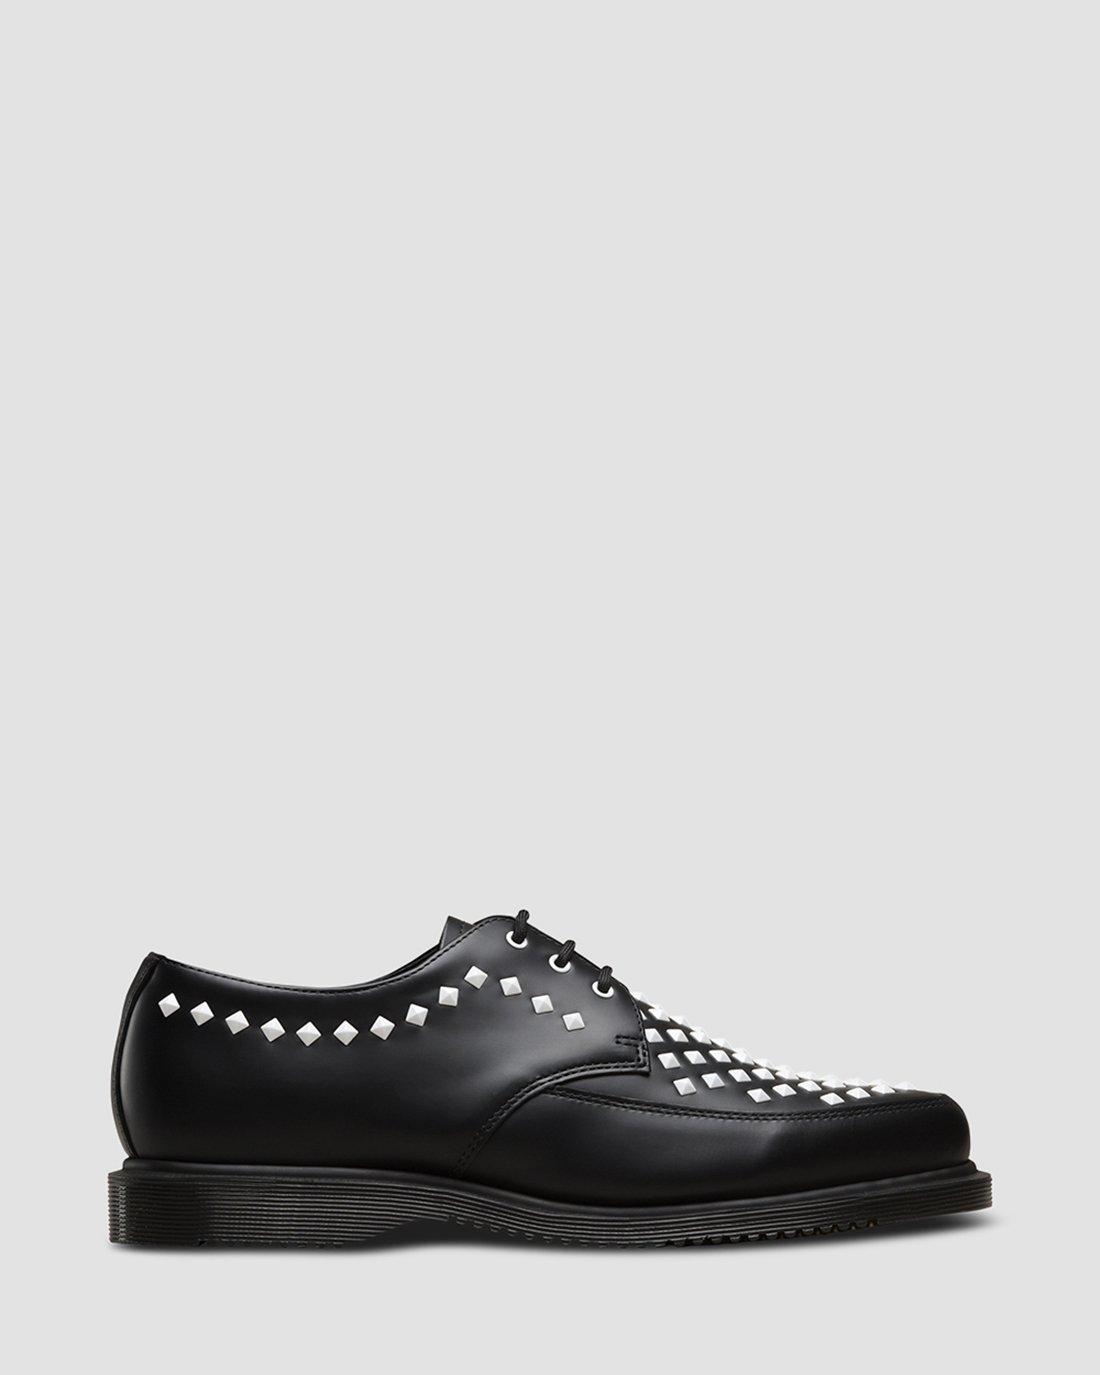 dr martens willis creepers in black